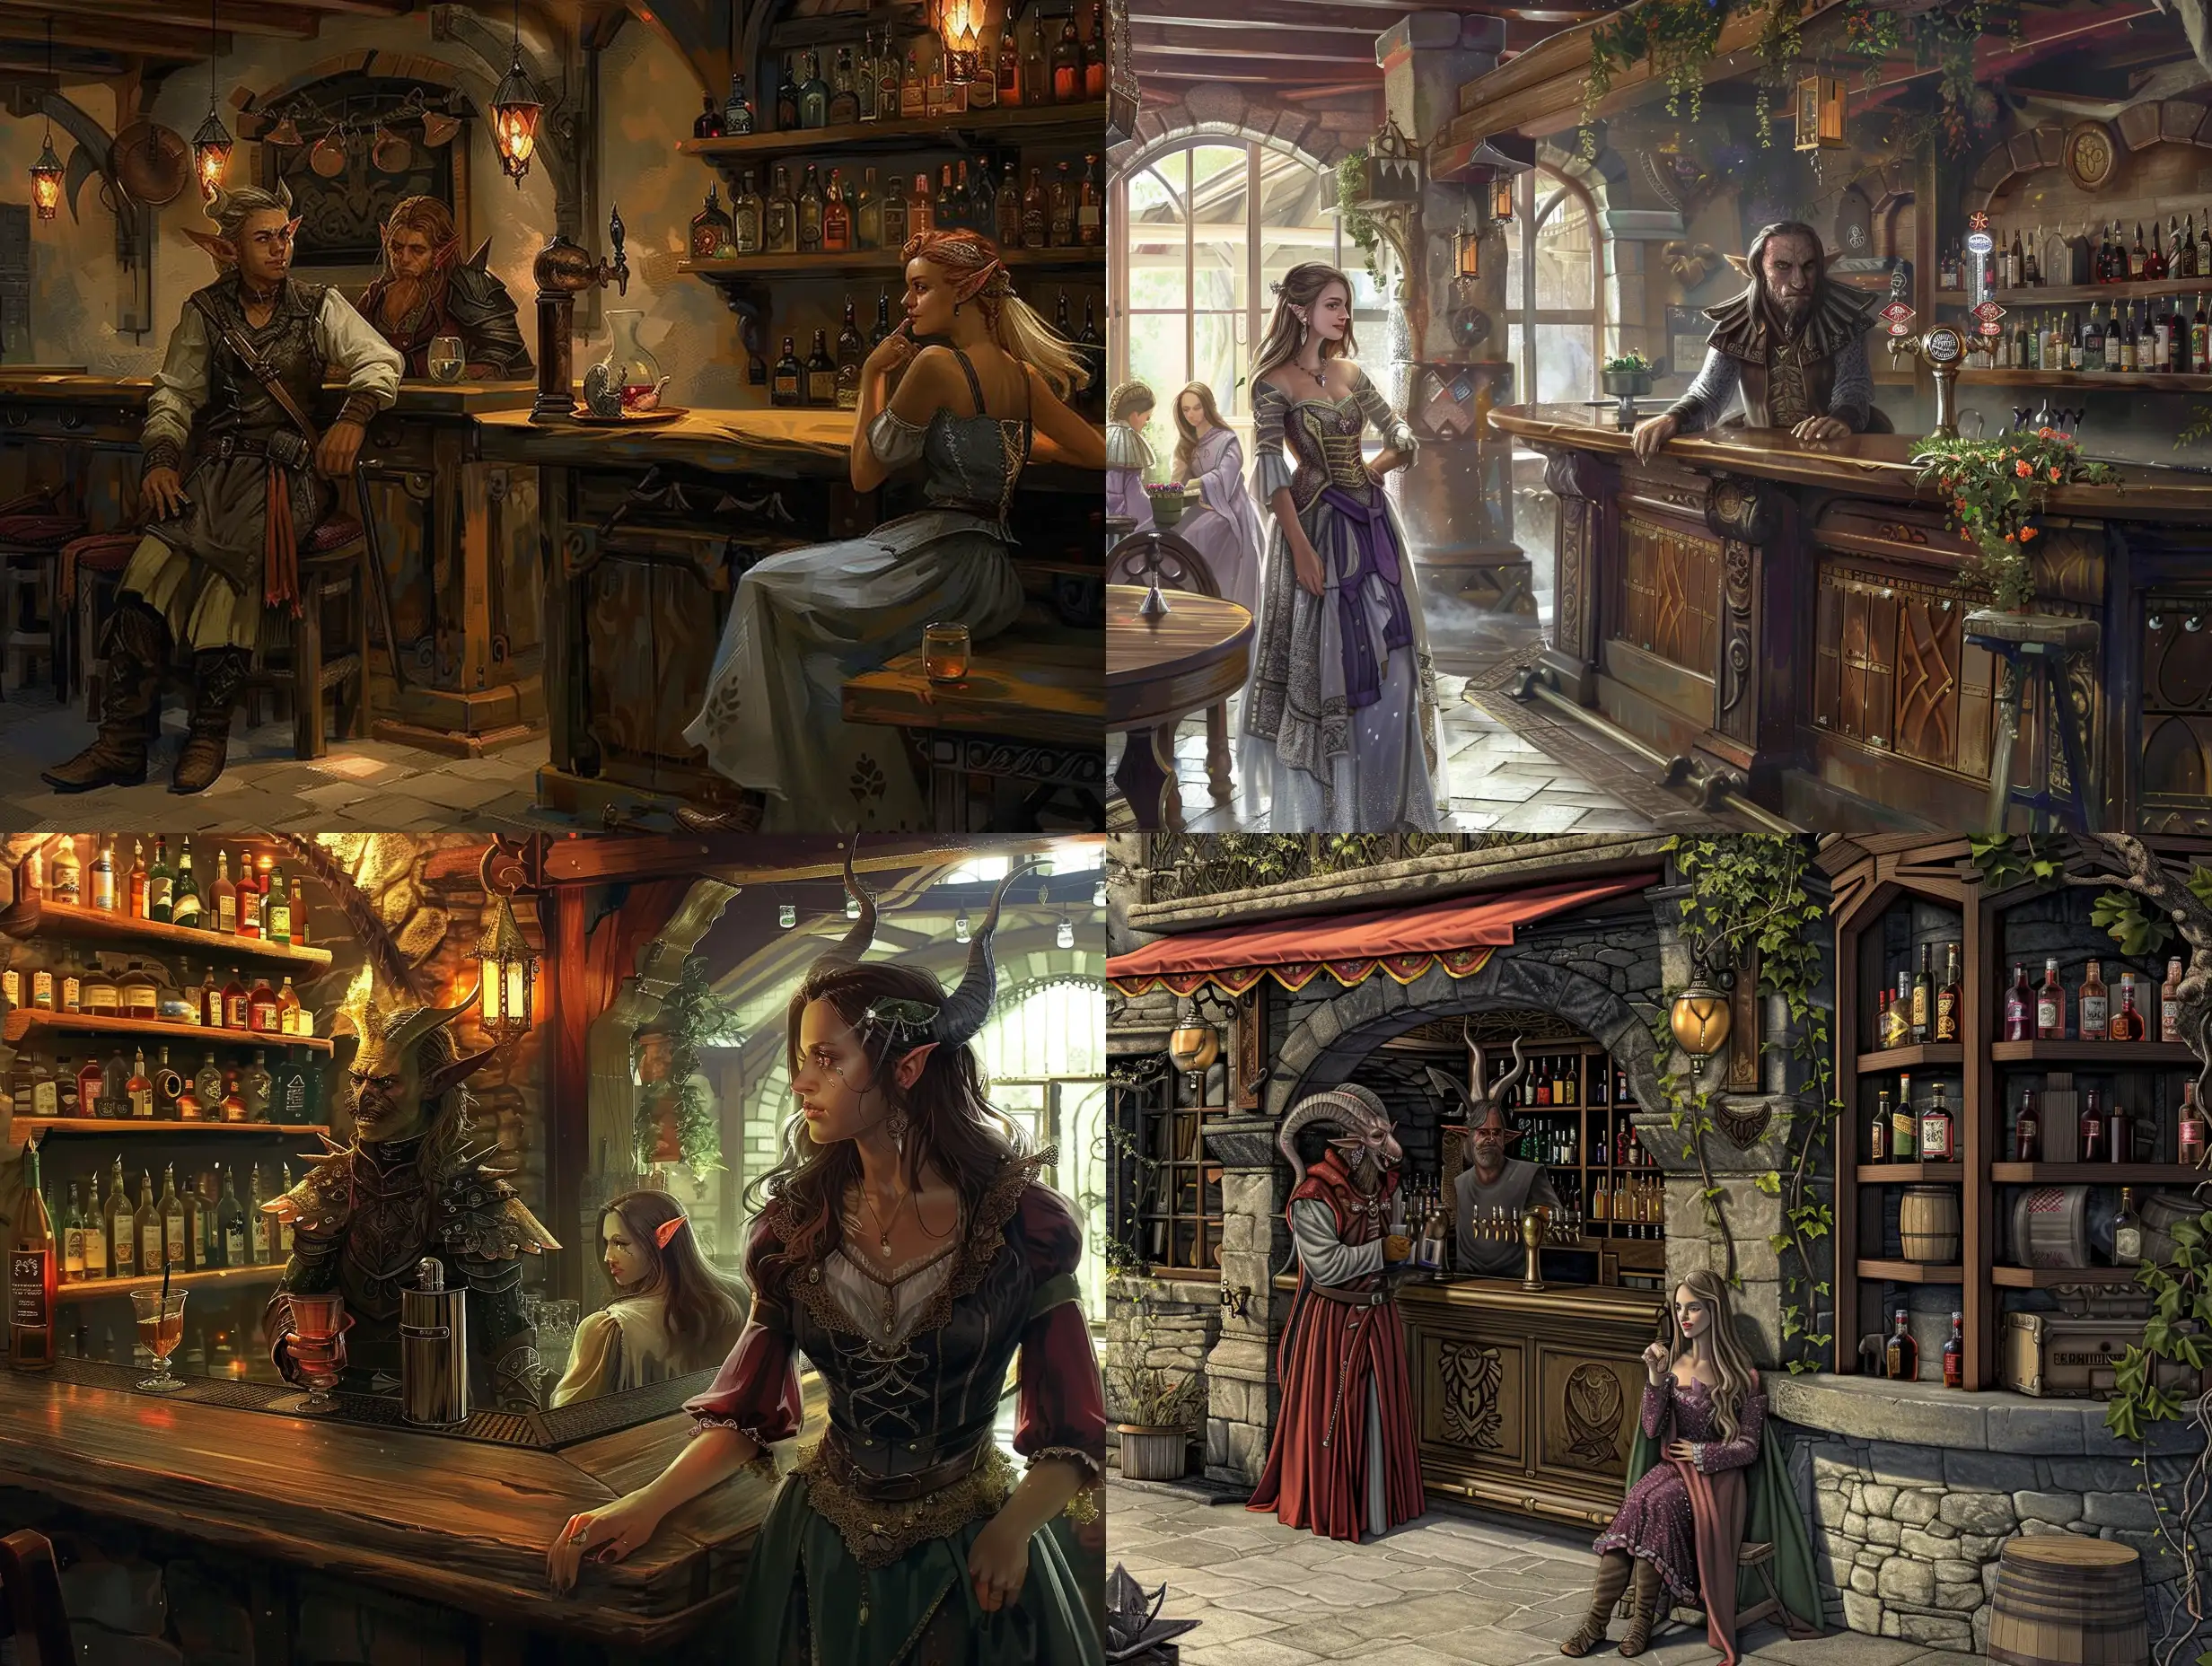 A medieval inn, a friendly male demon bartender behind the bar, a pretty female elven proprietor in front of the bar enjoying a quiet moment